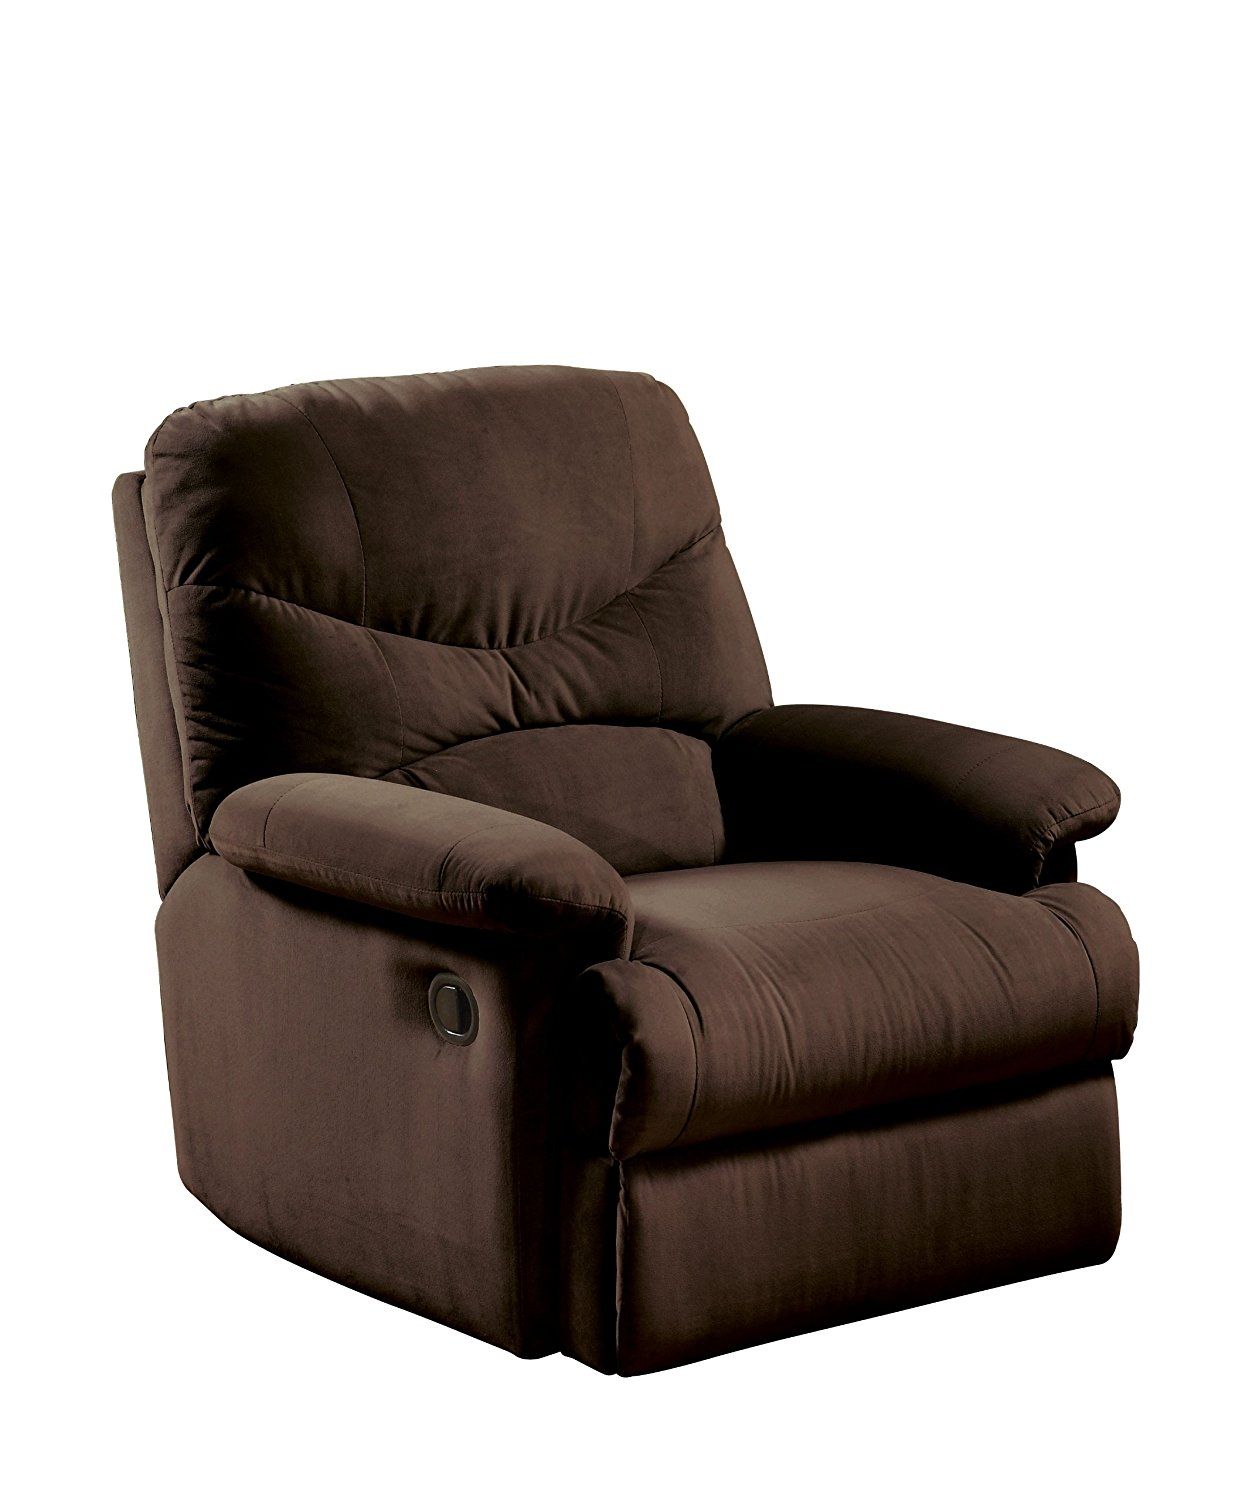 Best Reclining Sofa Chair Pictures Vanery Vanery Regarding Recliner Sofa Chairs (View 2 of 15)